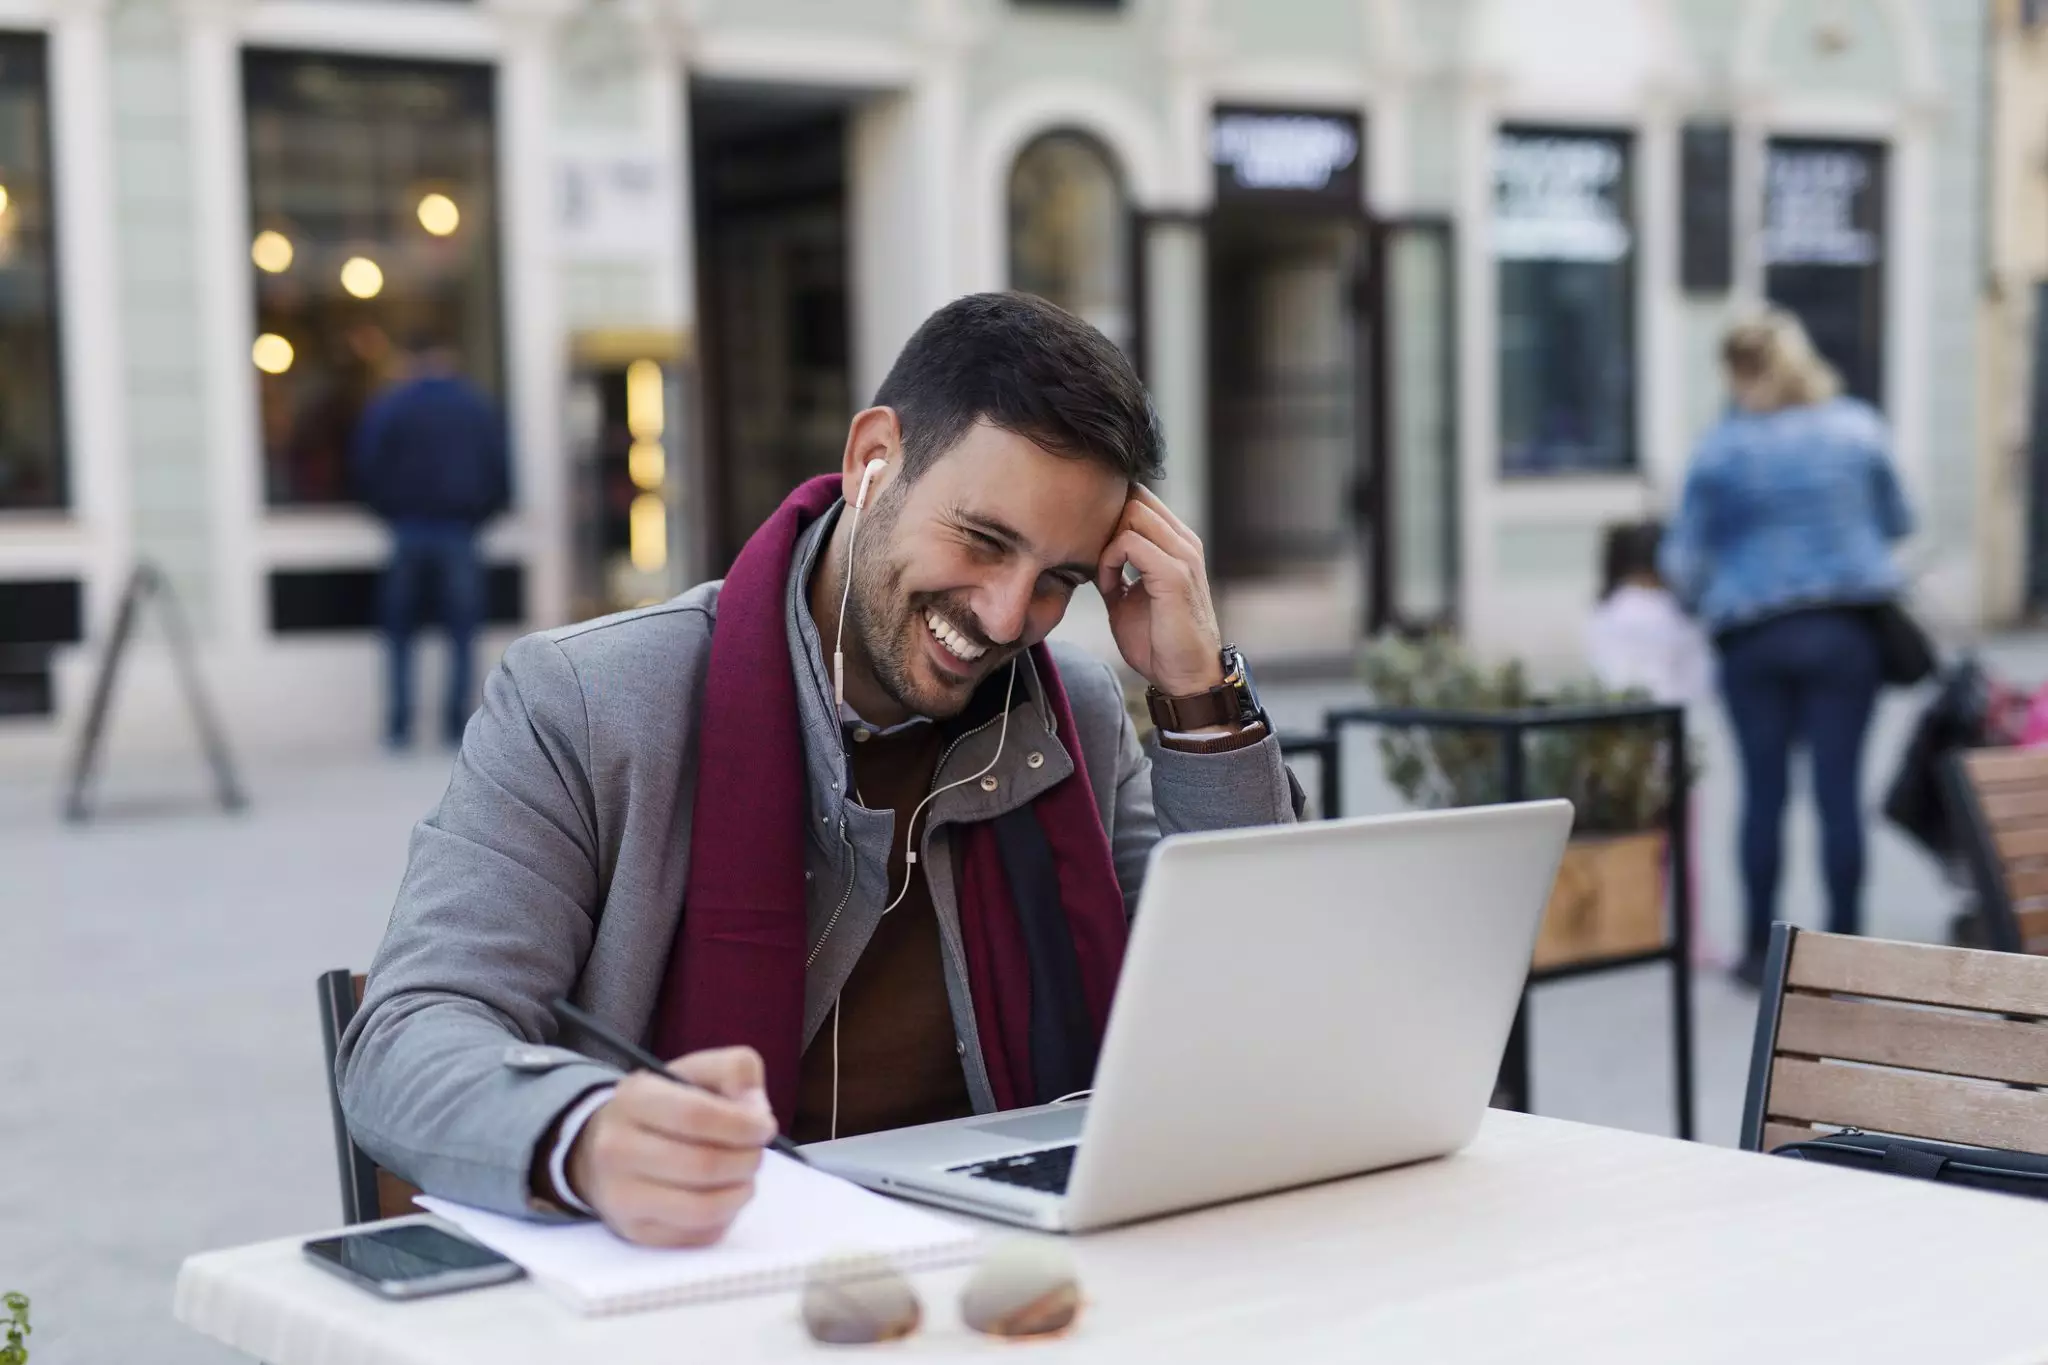 More companies hiring remote workers is a trend that will continue in 2019 and beyond.